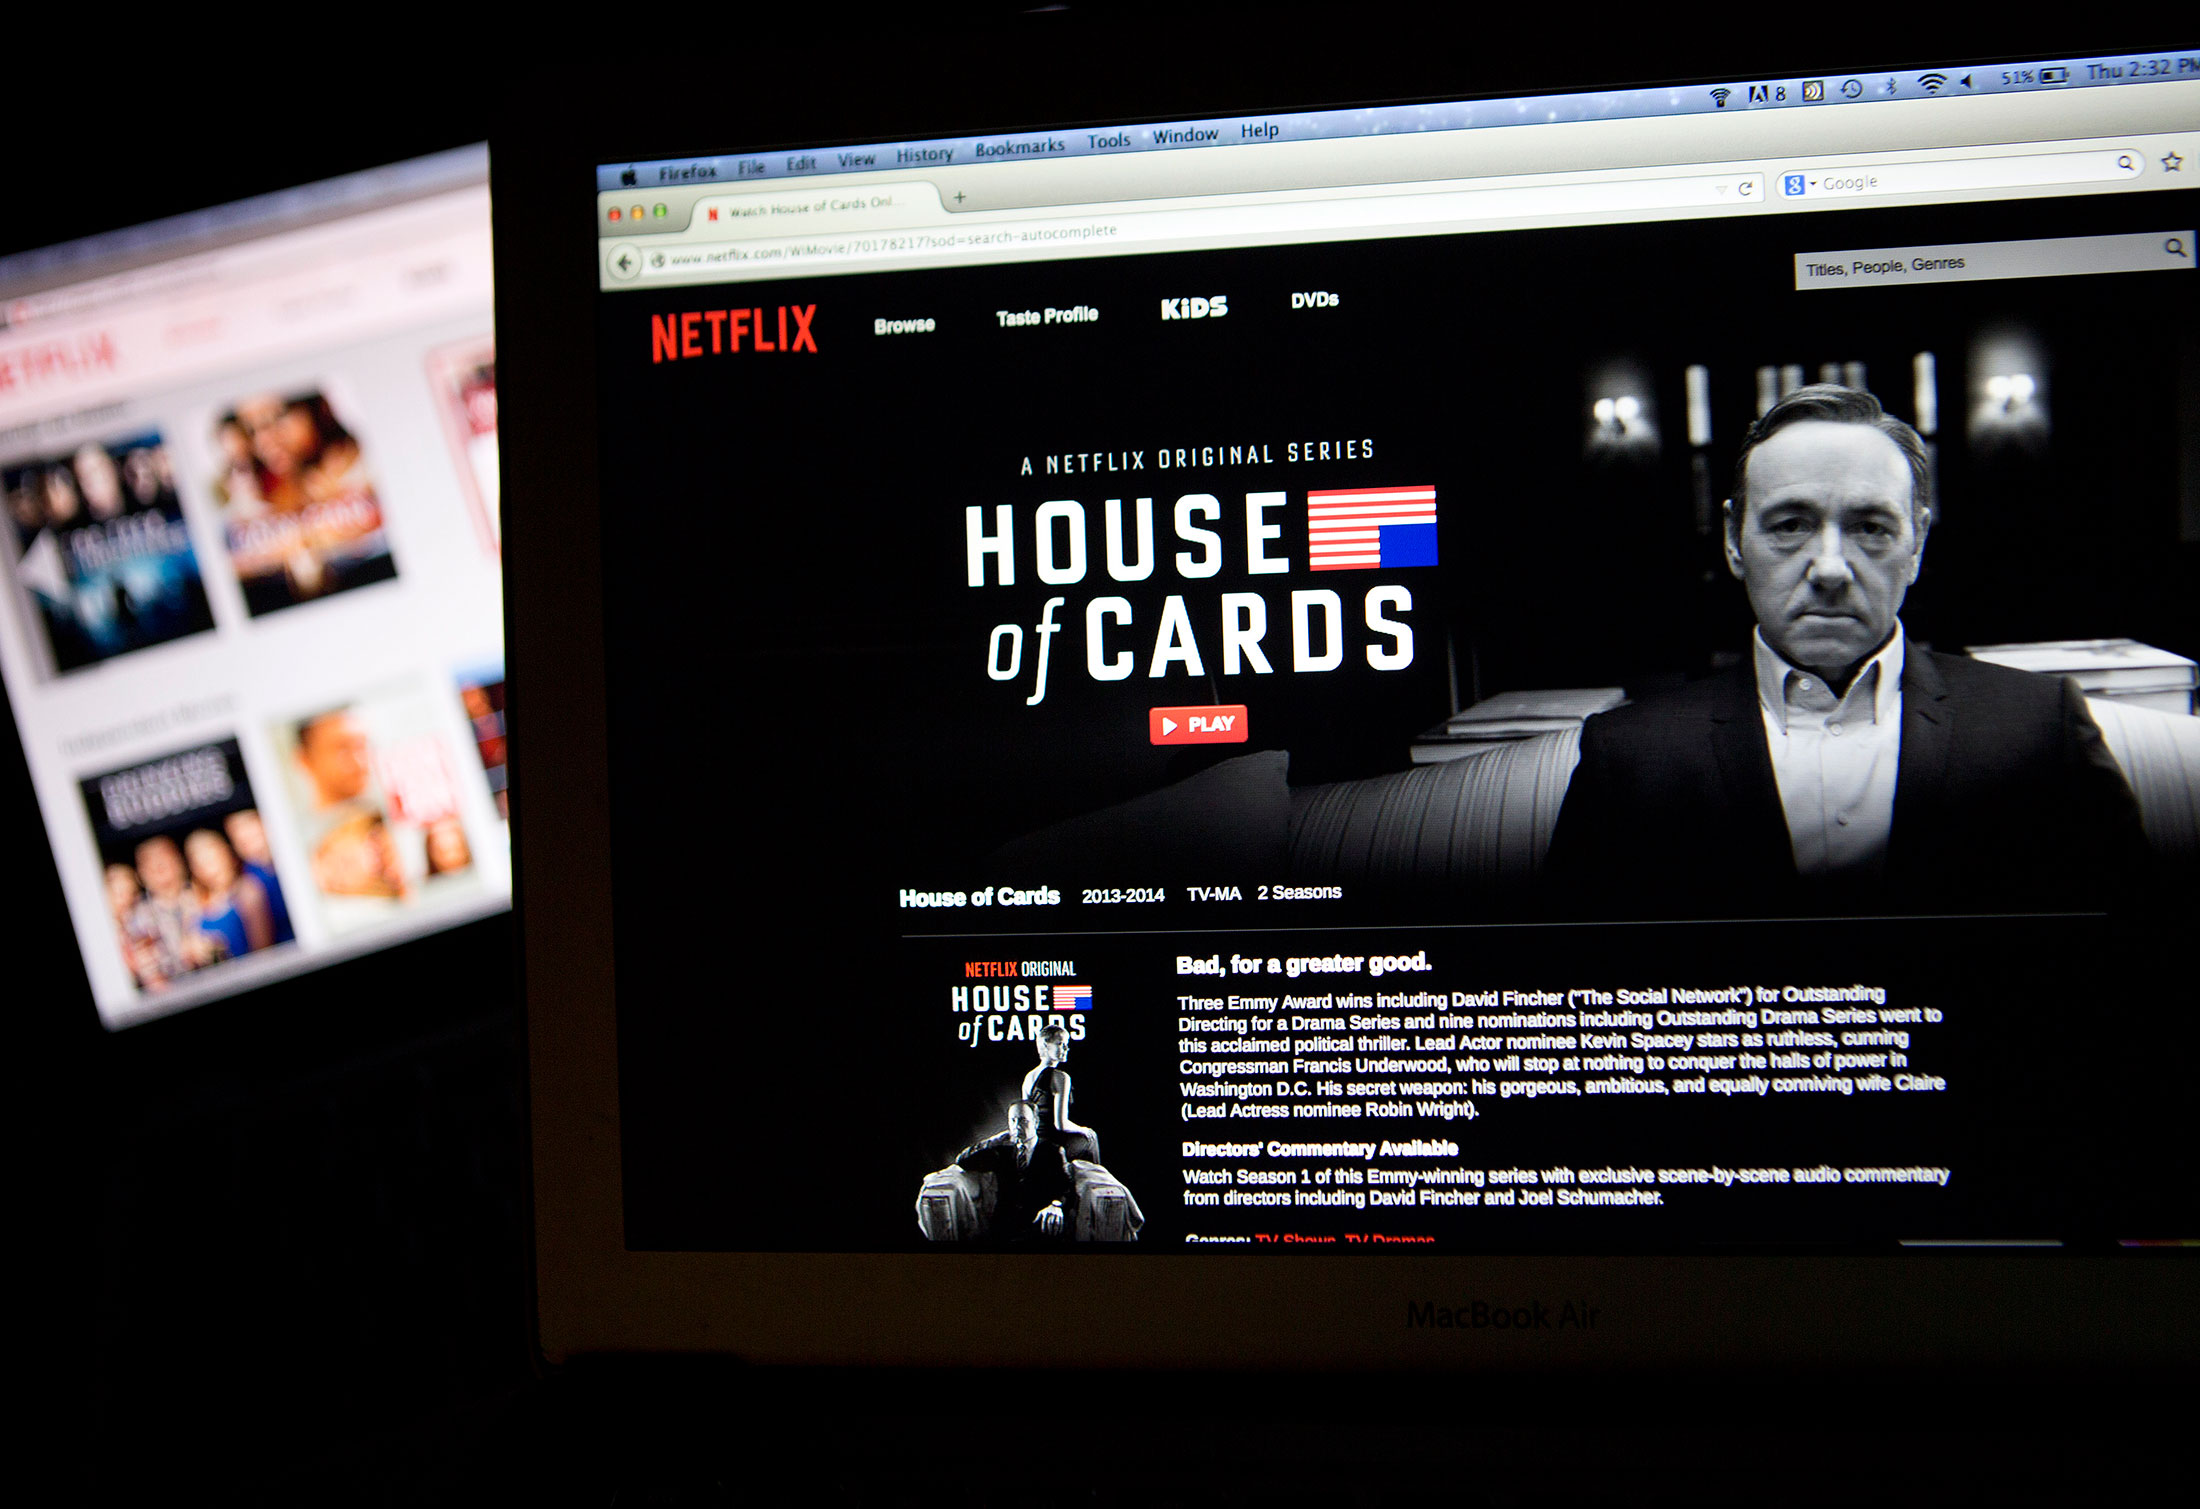 The Netflix Inc. website displays the &quot;House of Cards&quot; series.
